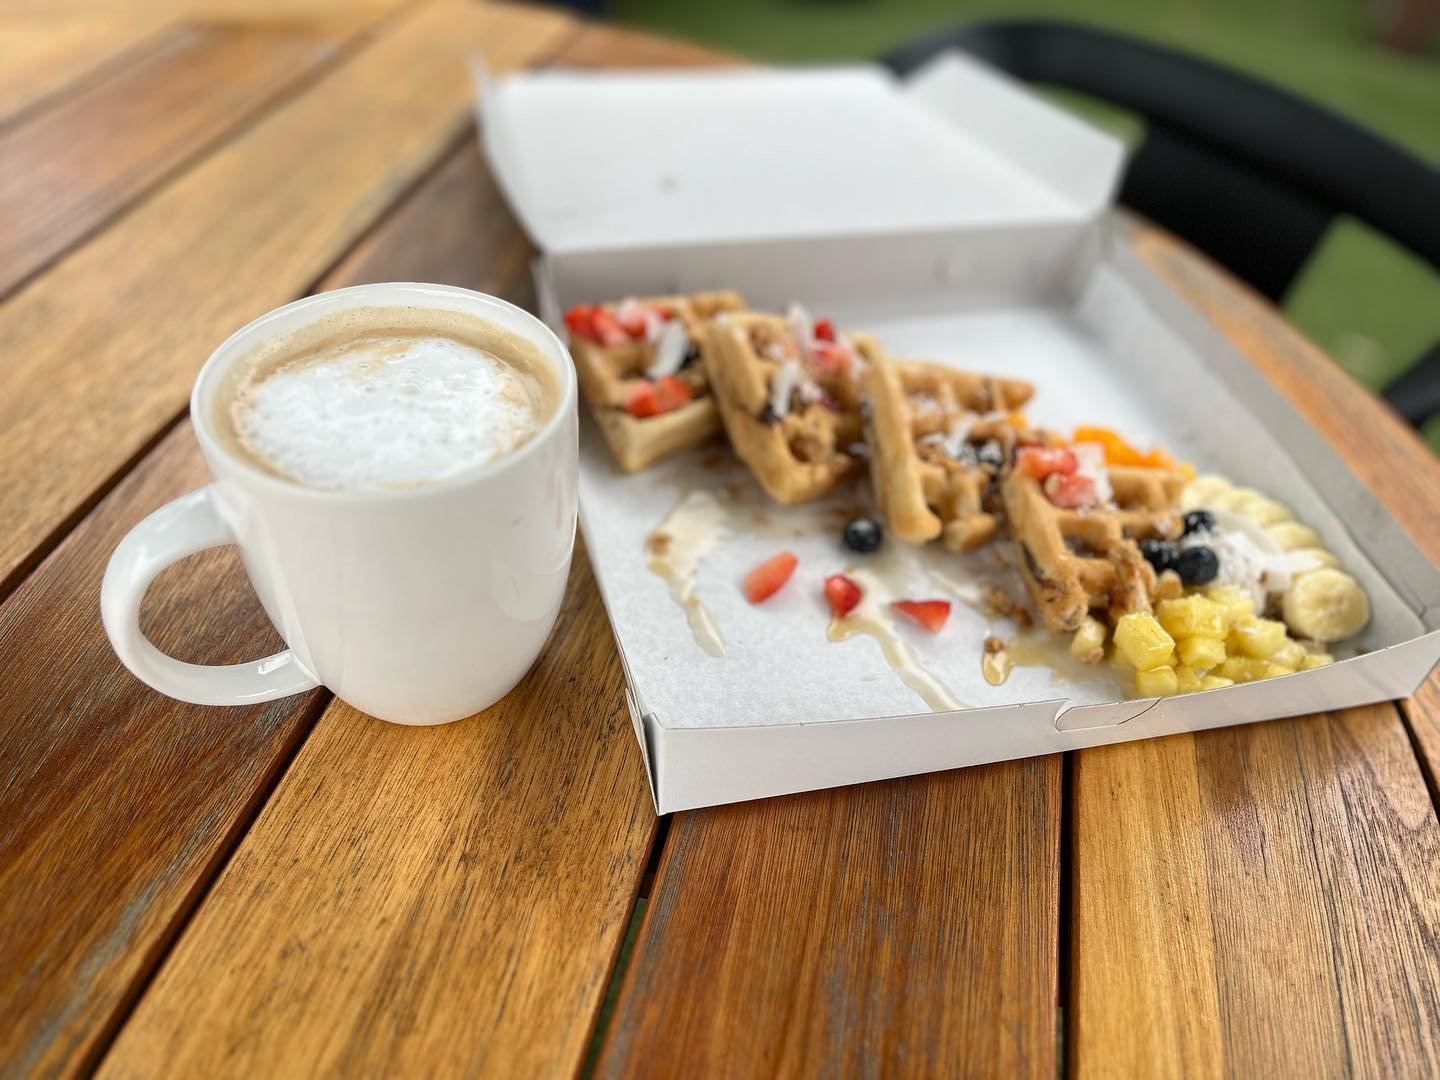 Brighten up your rainy weekend with a gut-friendly adaptogen latte from @thegarden.atboardroom and a delicious gluten-free ulu waffle from @blendedhawaii ☀️ Choose between our adaptogens: lions mane, collagen, reishi, maca root, and ashwagandha! Or t